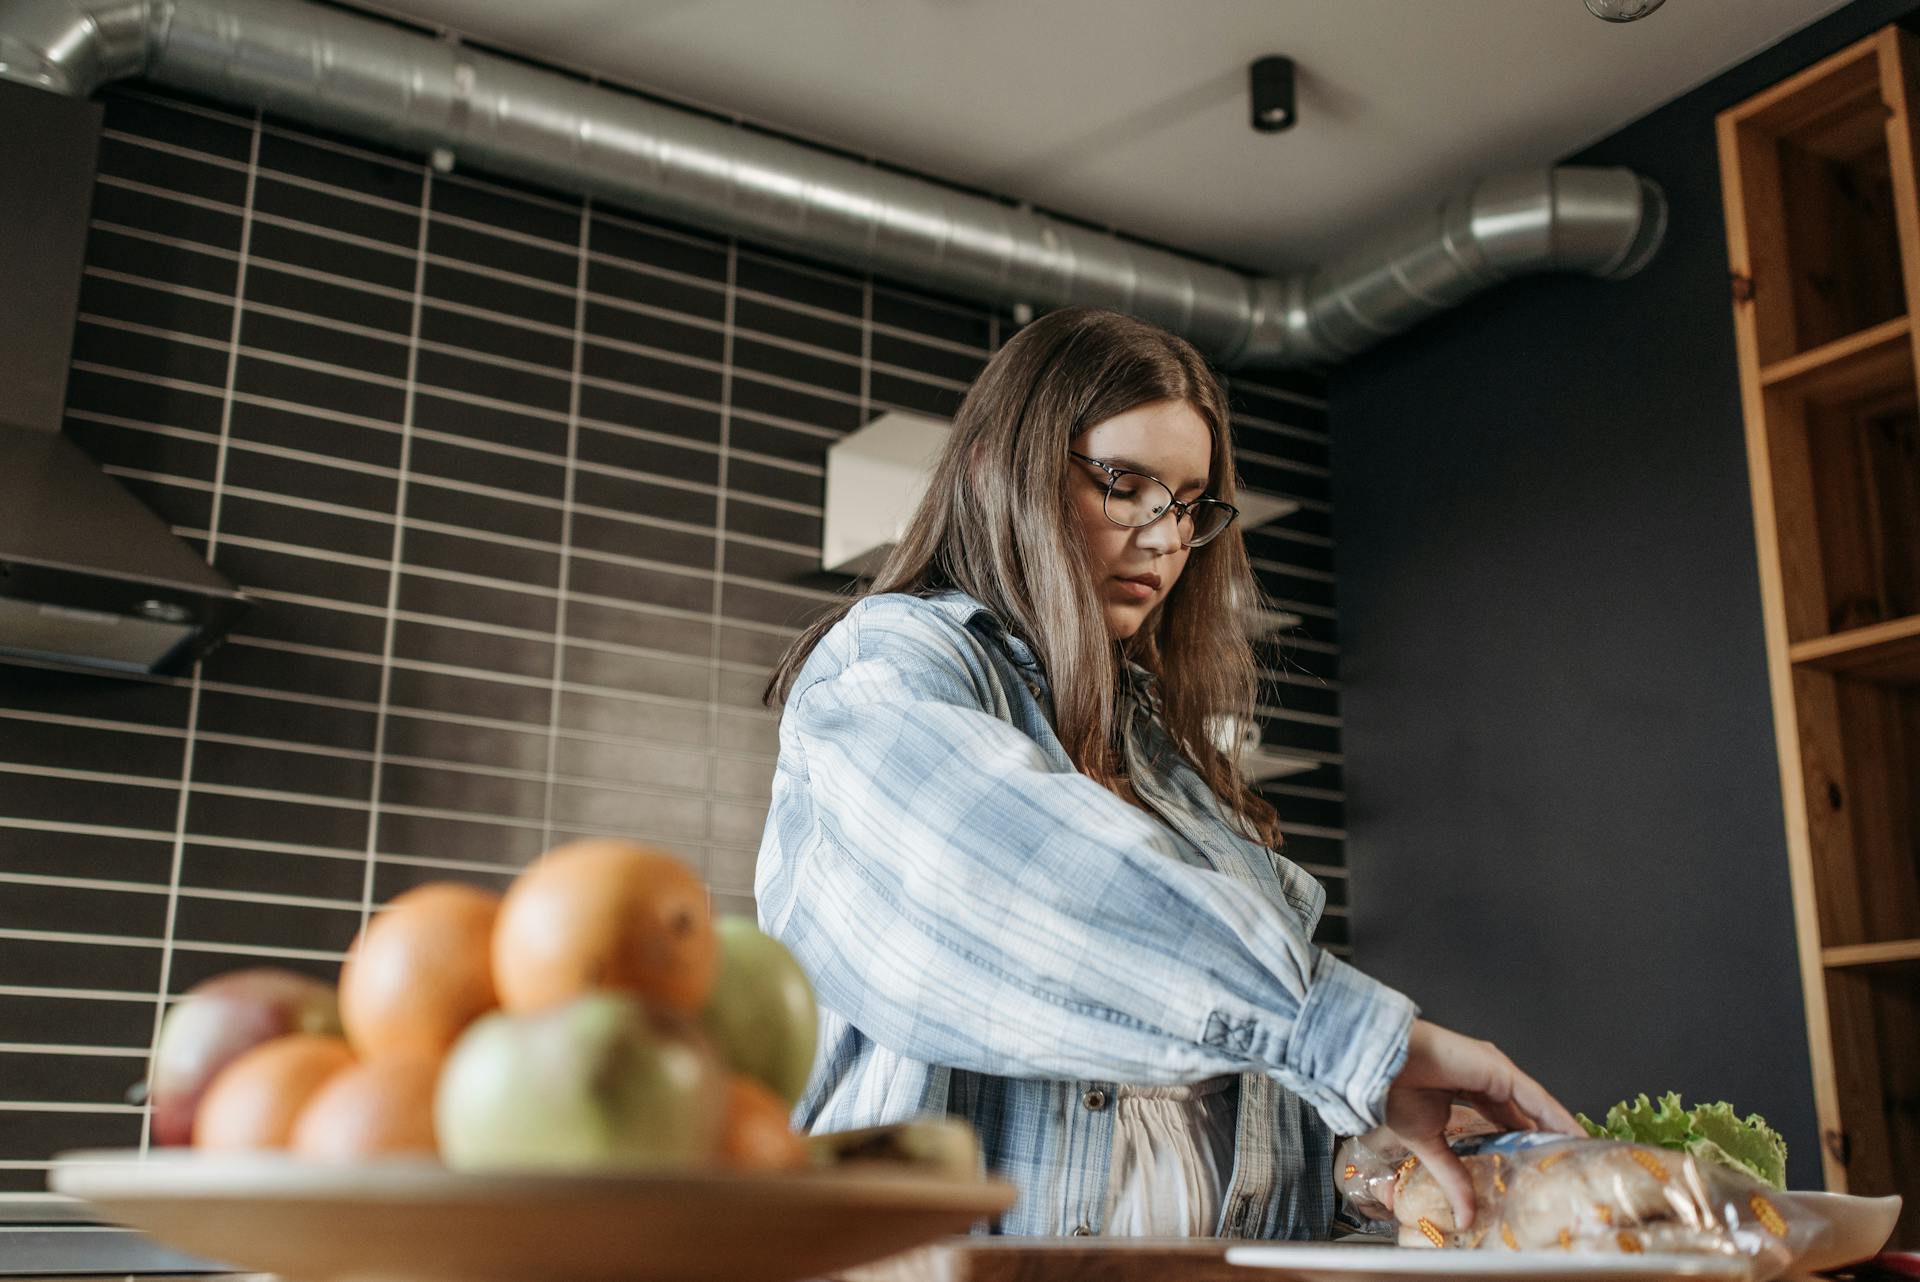 A woman preparing food in the kitchen | Source: Pexels